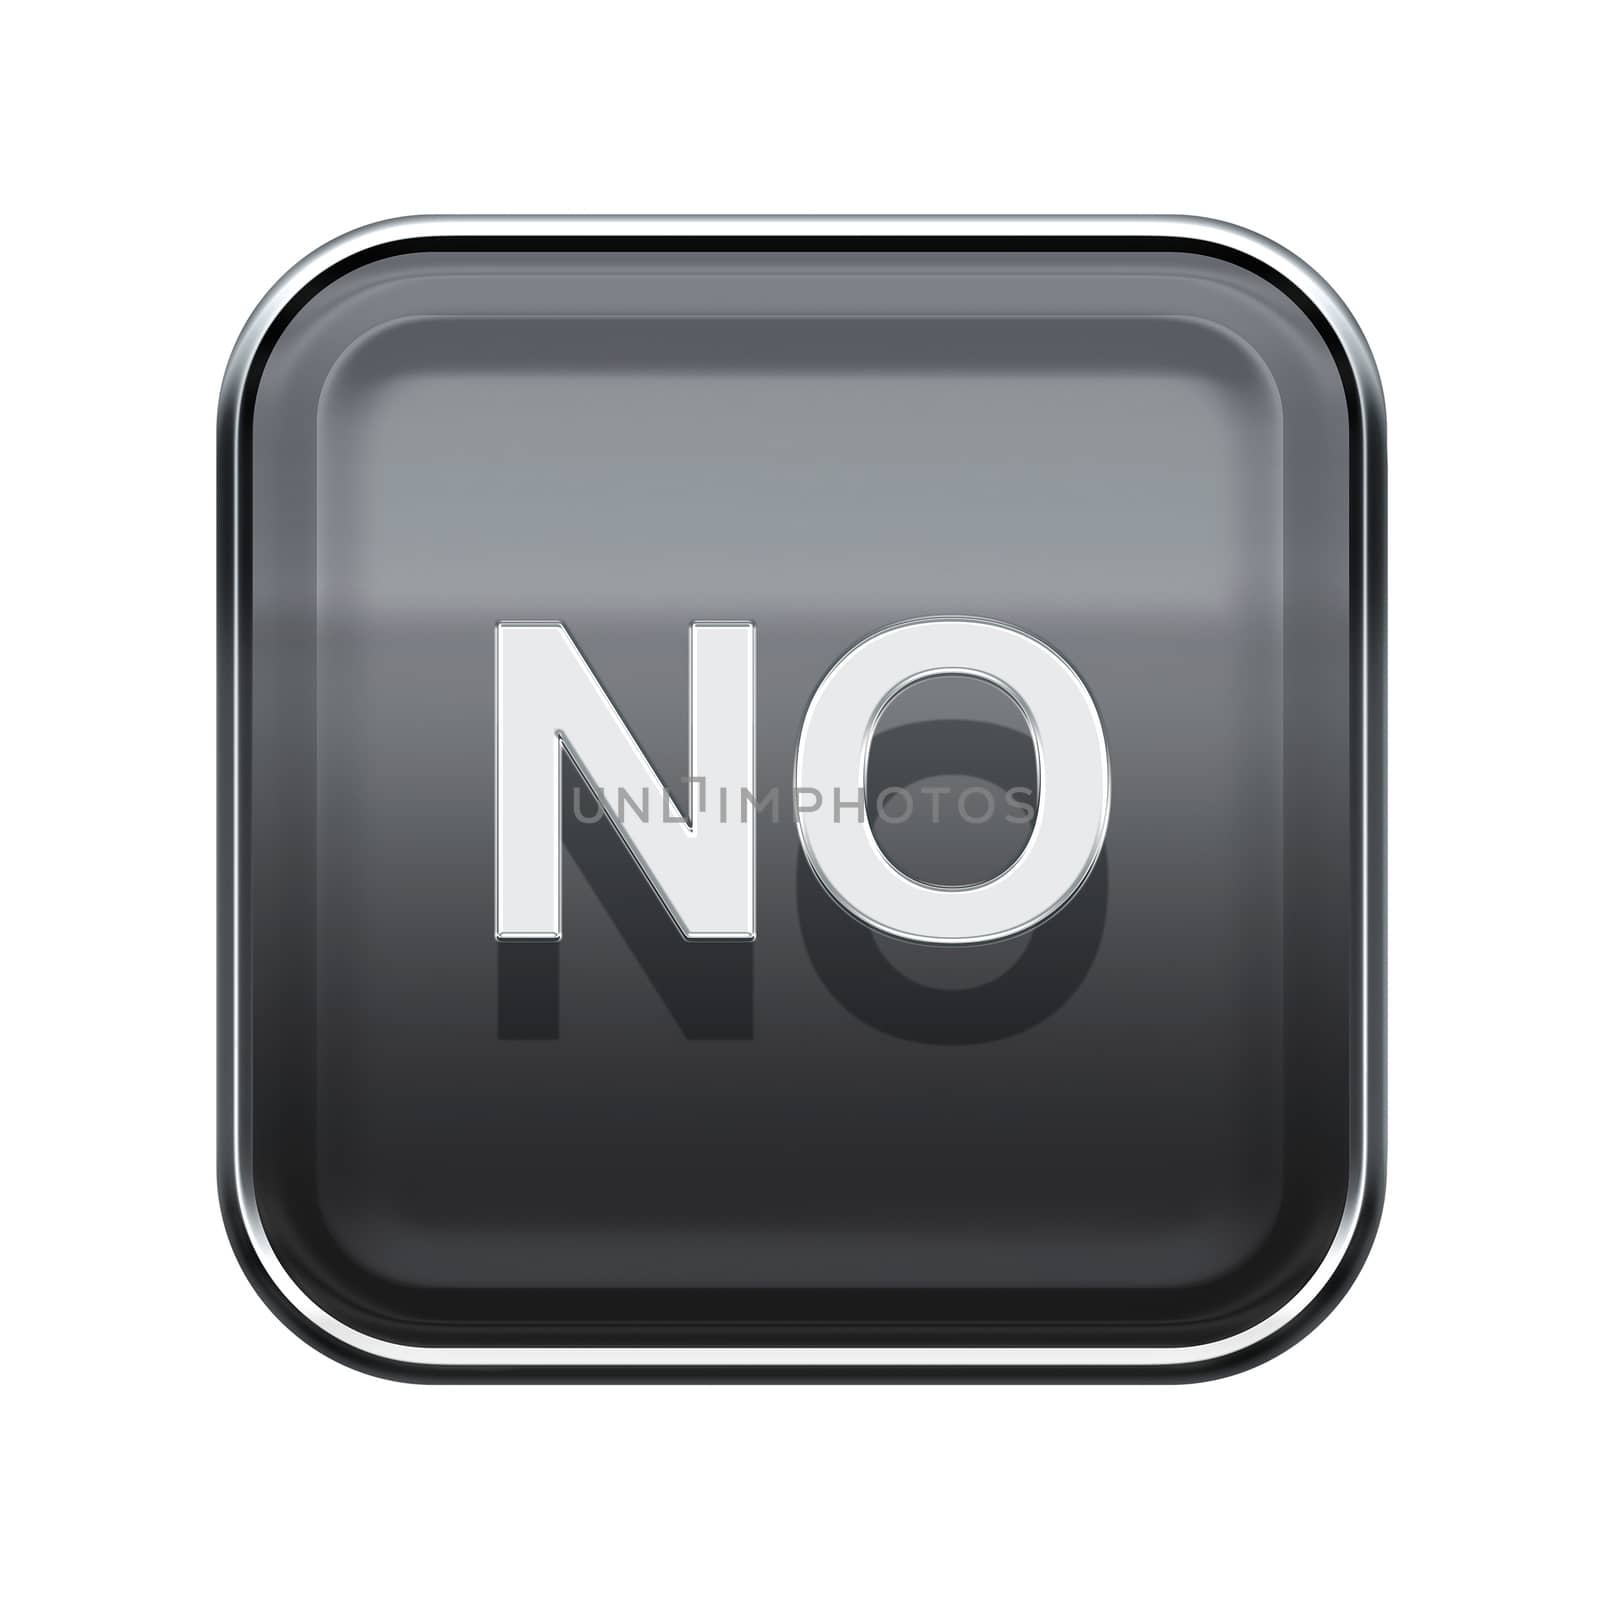 No icon glossy grey, isolated on white background